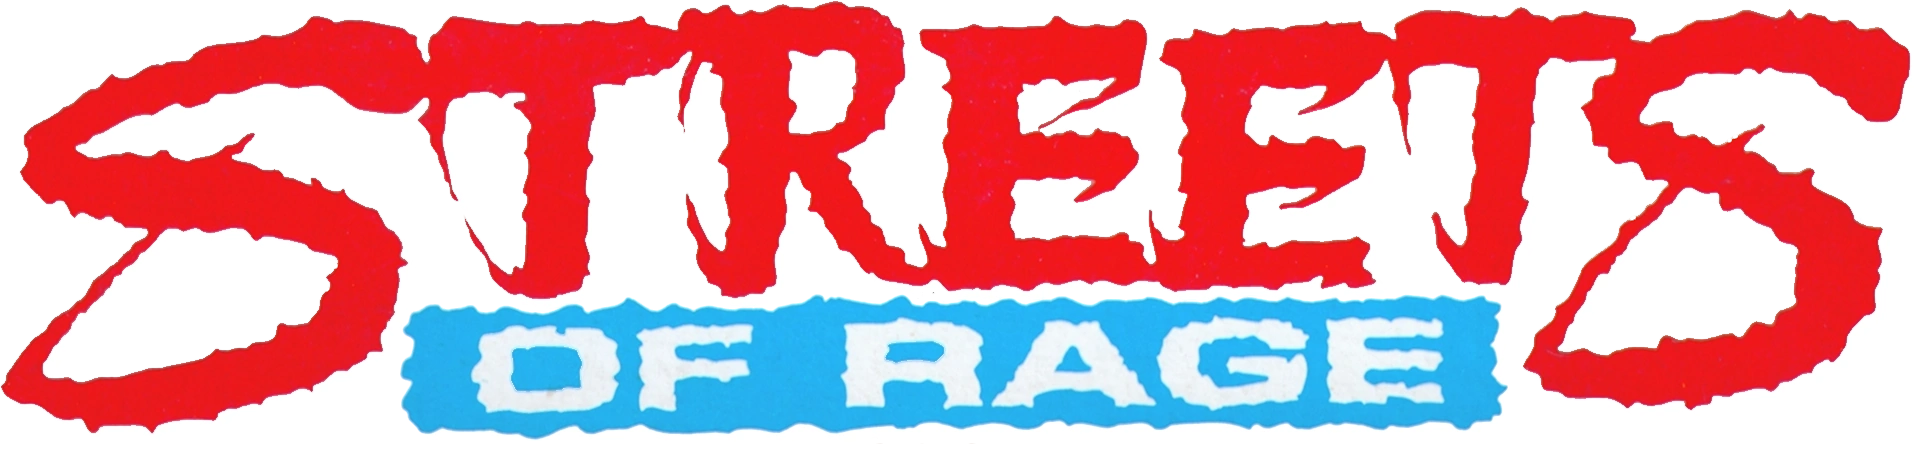 list of Streets of Rage video games